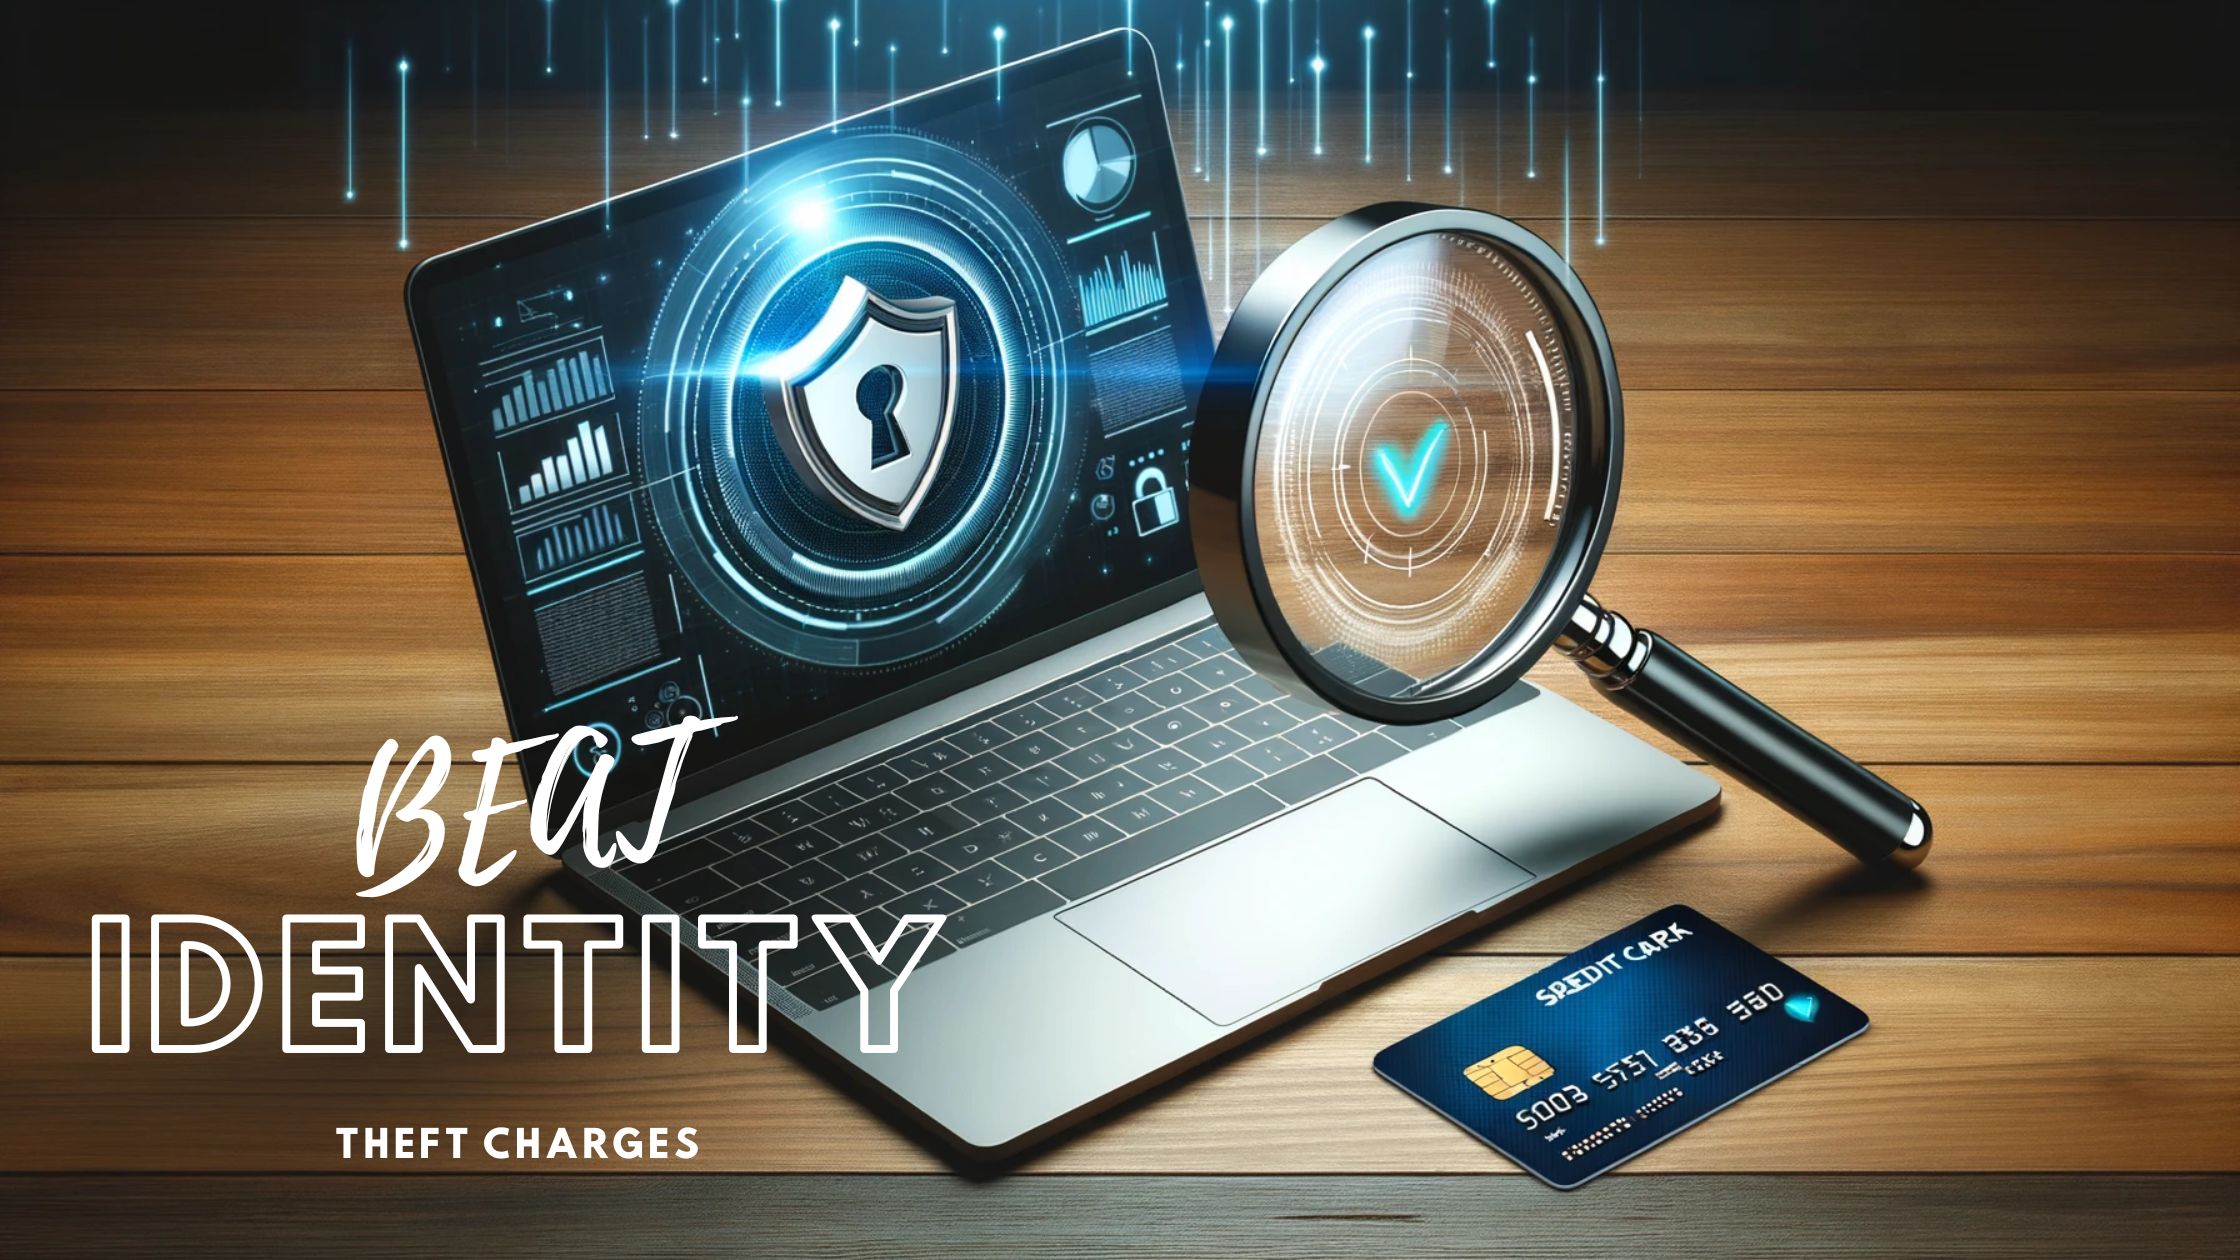 how to beat identity theft charges